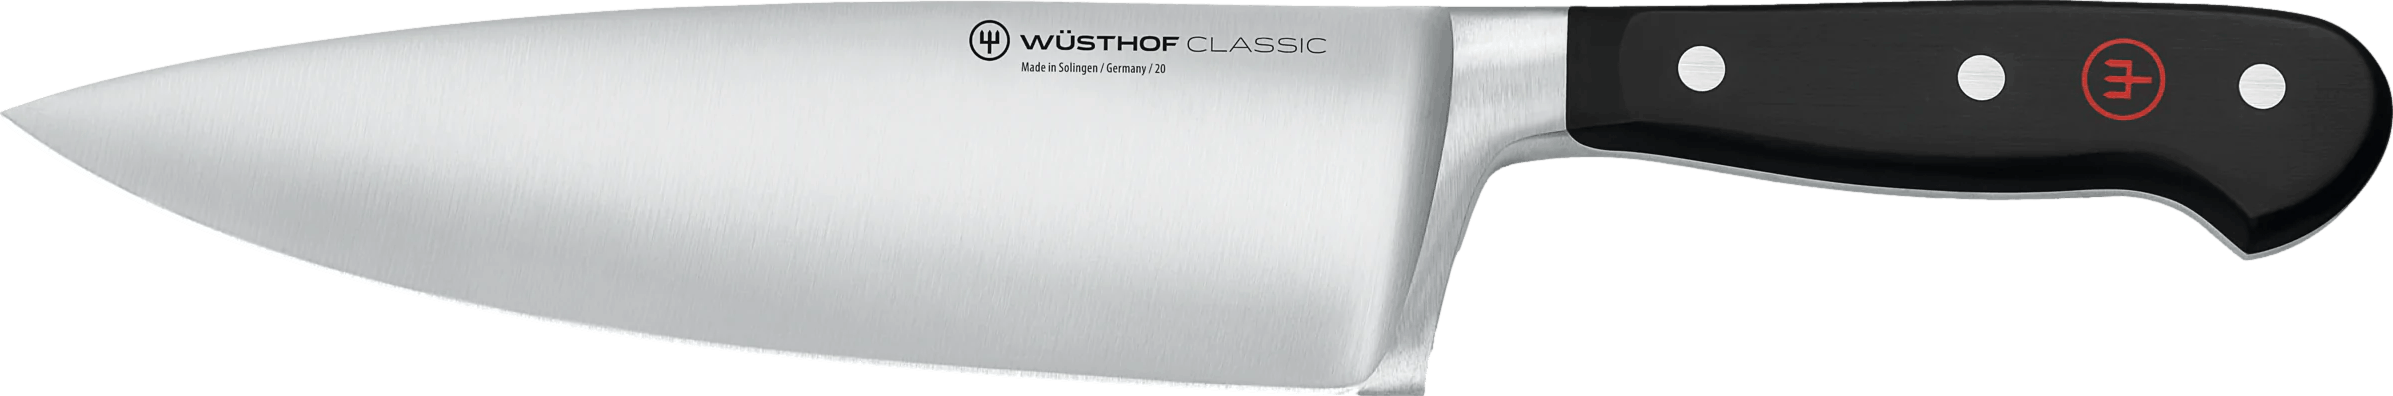 WÜSTHOF Classic 8" Extra Wide Chef's Knife